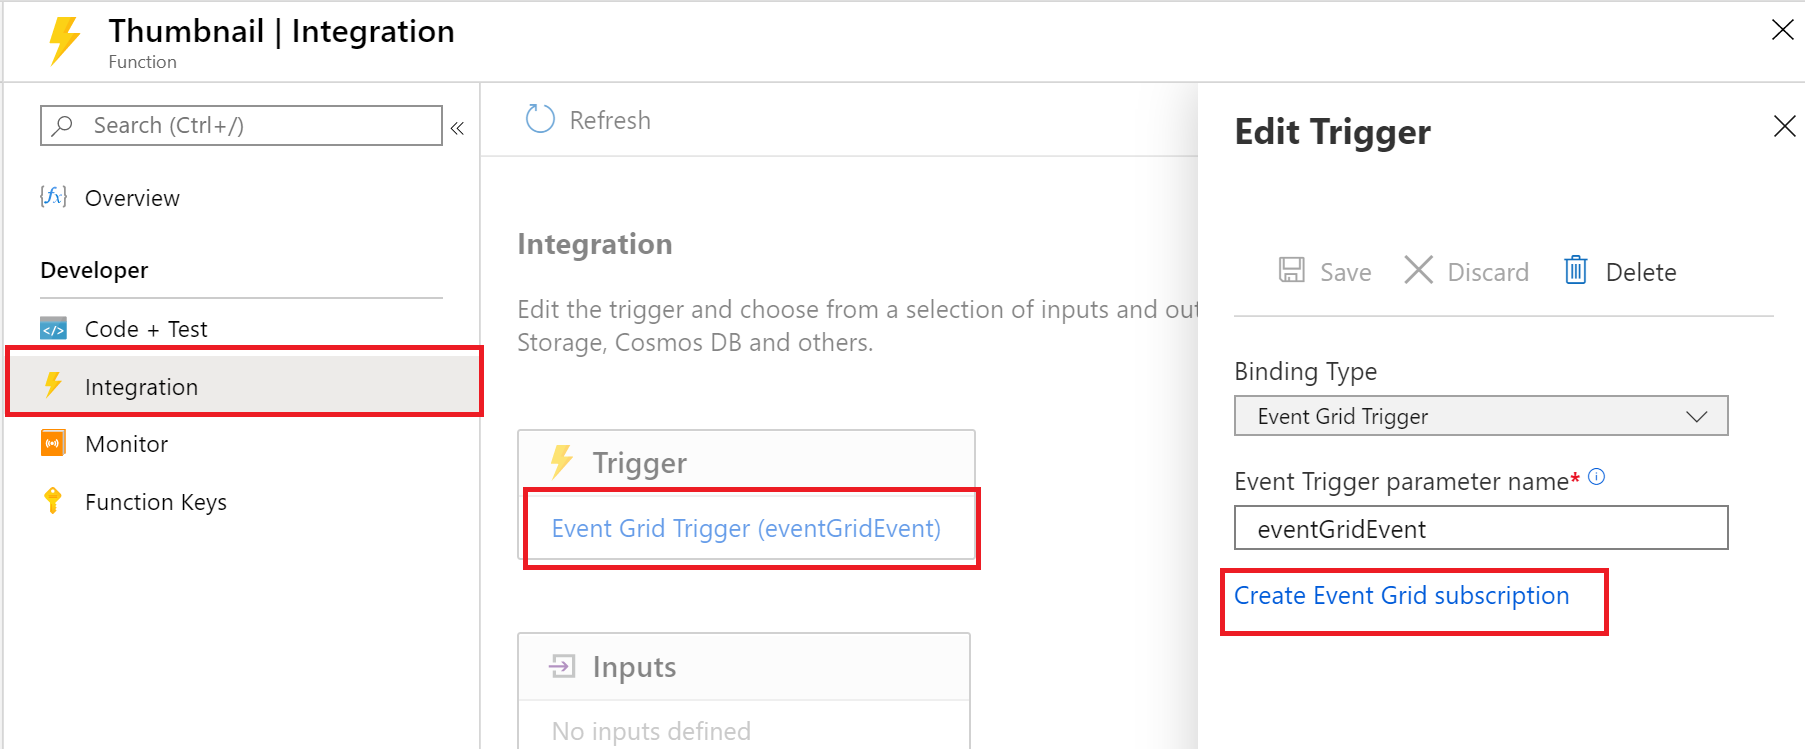 Navigate to Add Event Grid subscription in the Azure portal